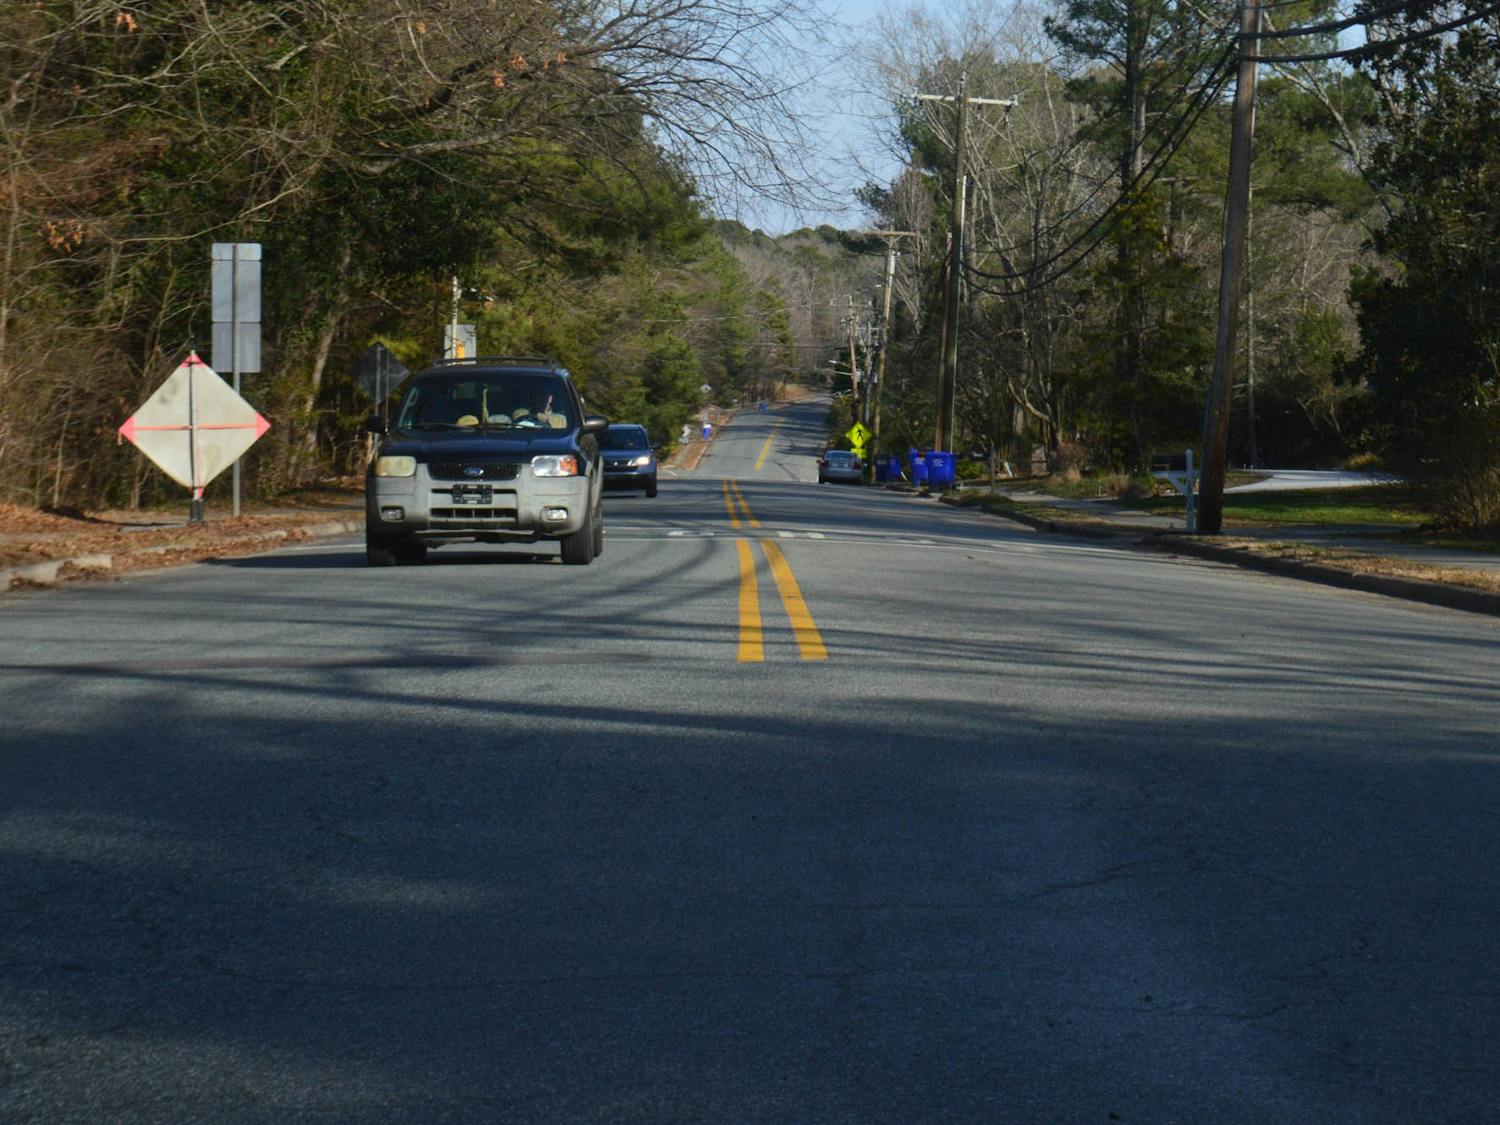 Cars drive down the busy Ephesus Church Road in Chapel Hill, NC on Tuesday, Feb. 15, 2022. The Town of Chapel Hill has proposed bike lanes that would result in narrower vehicle lanes and the prohibition of roadside parking.